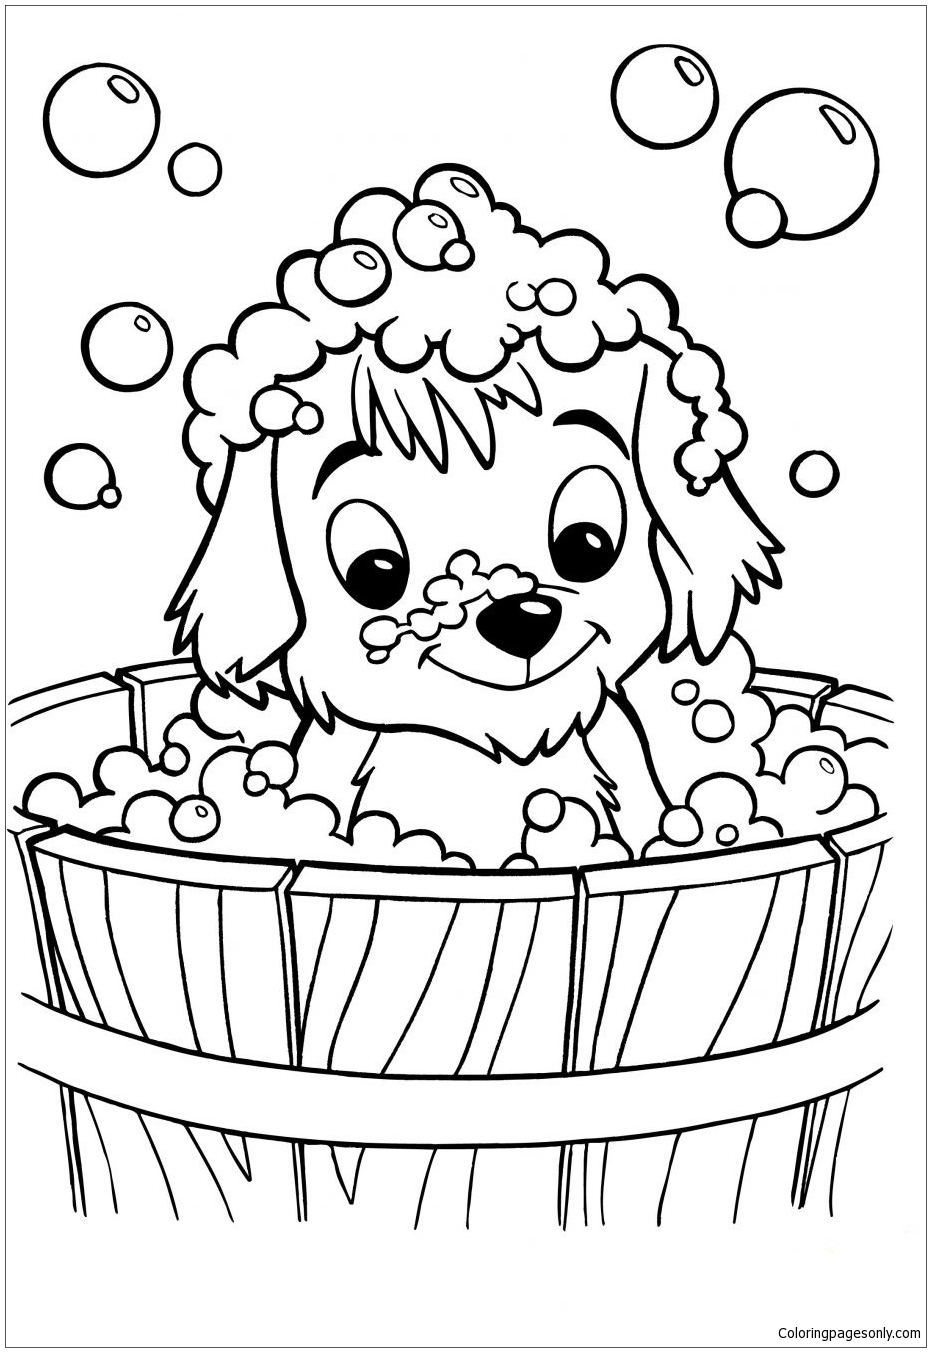 Surging Cute Puppy Coloring Pages   Puppy Coloring Pages ...